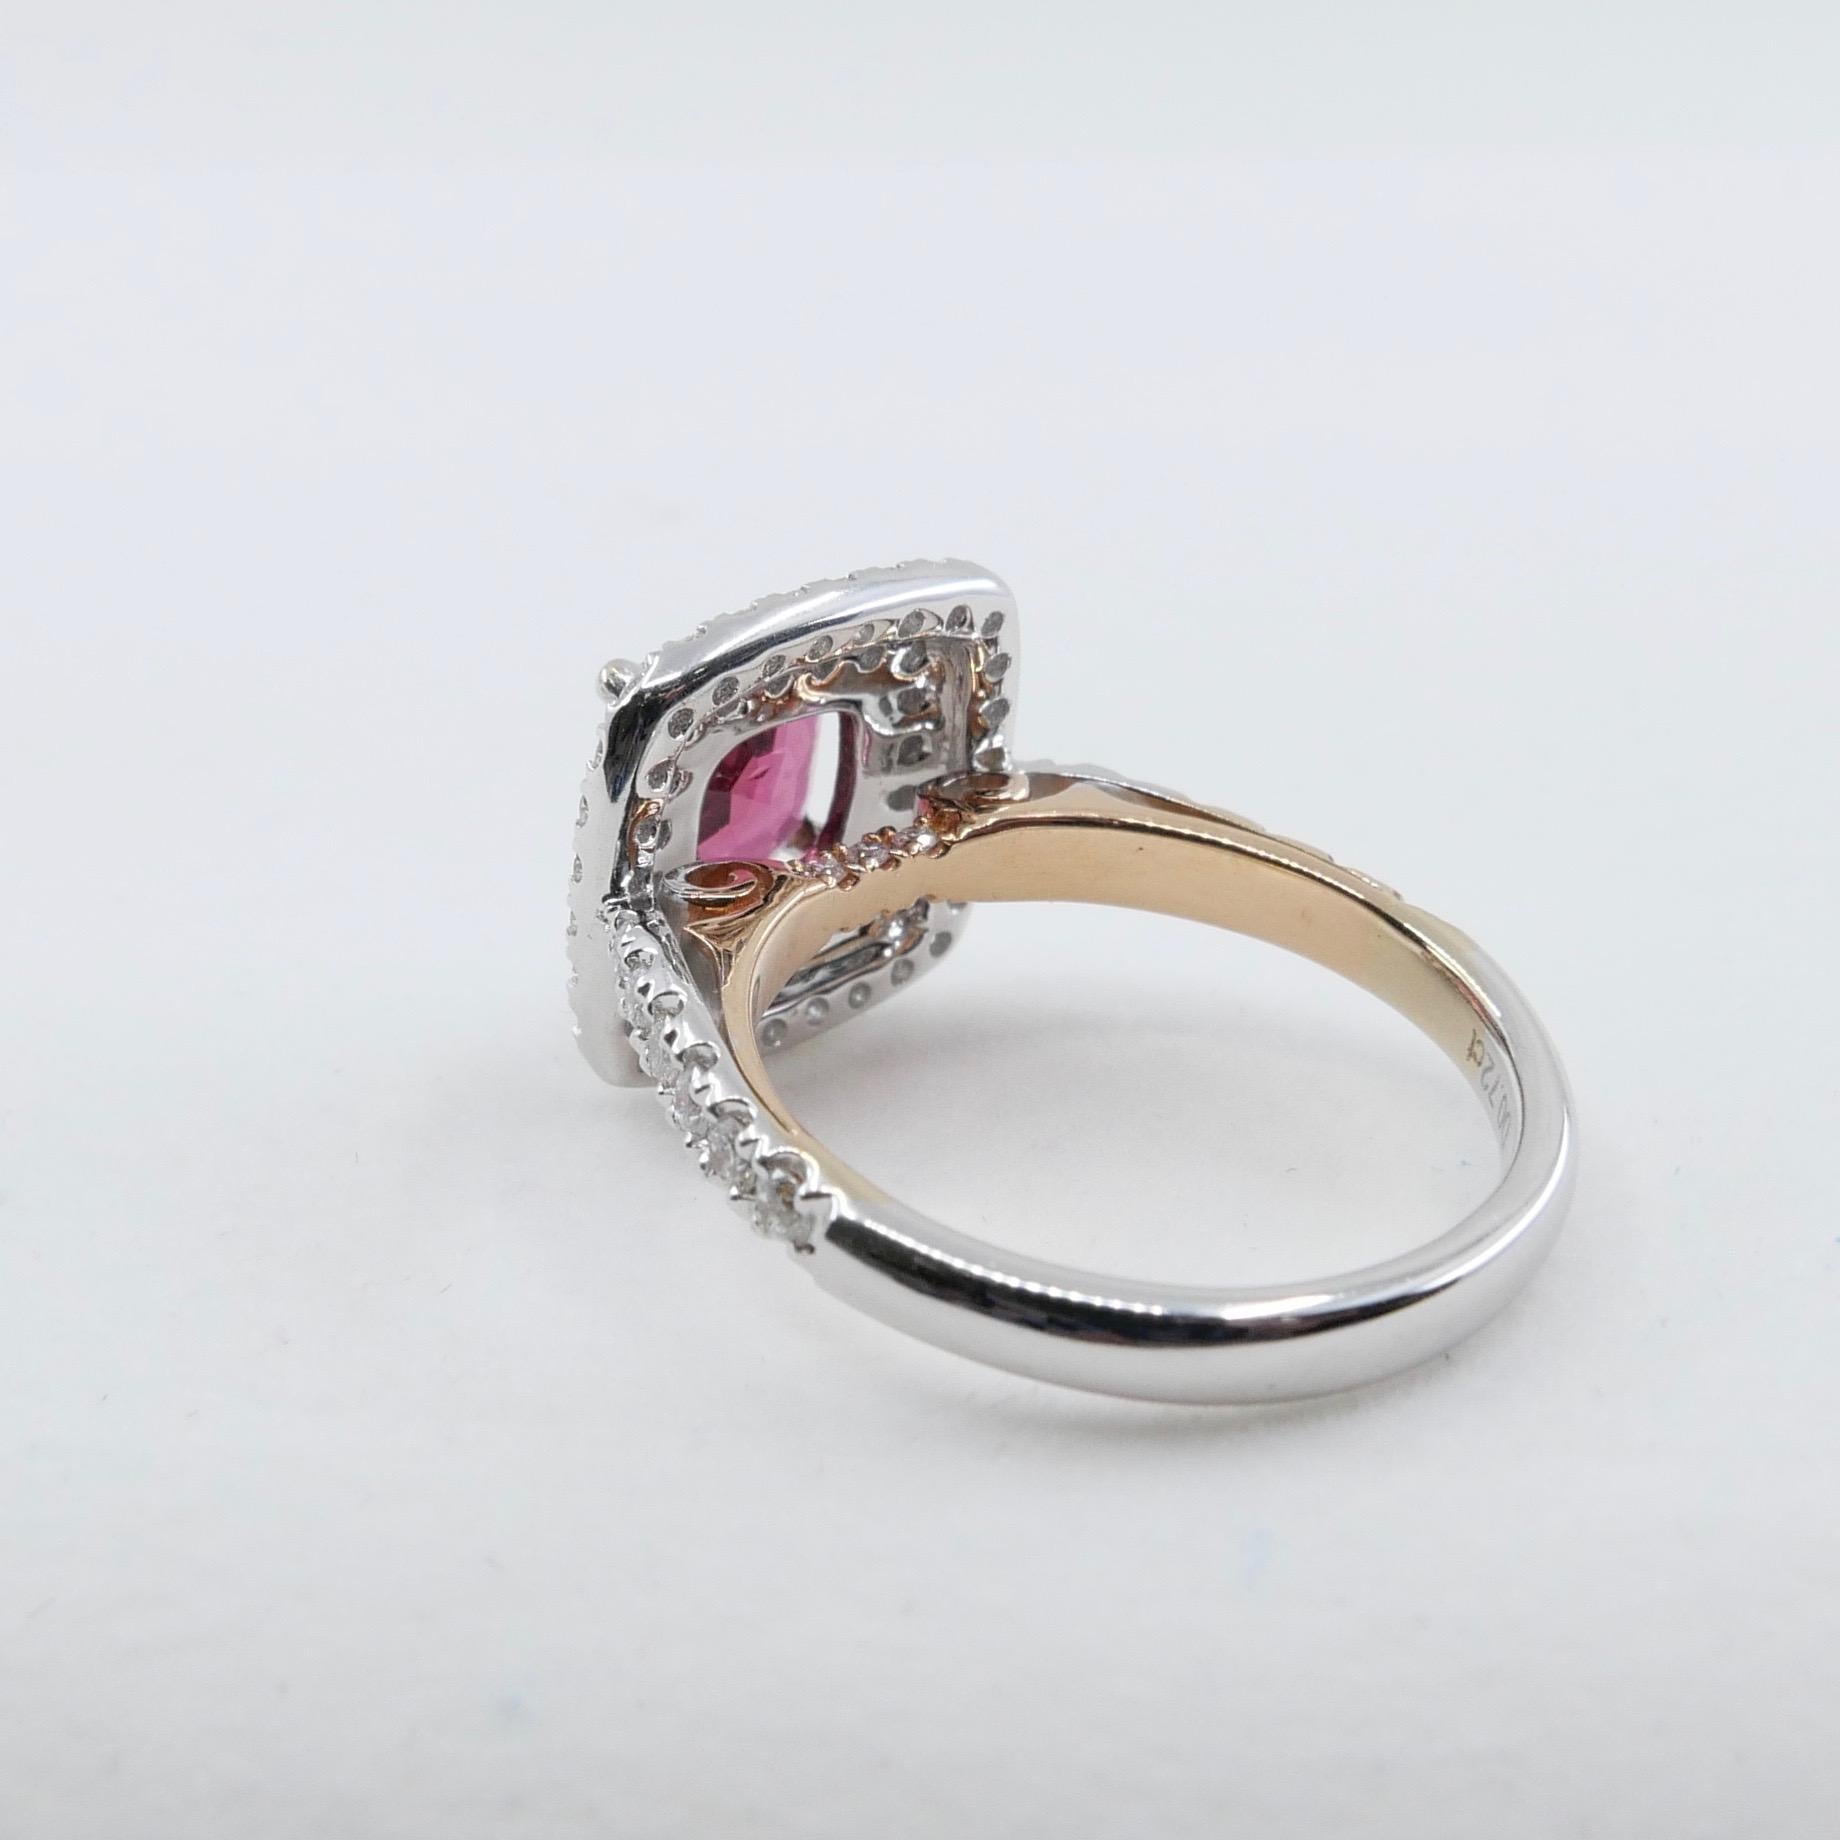 Women's Natural Red Spinel 1.51 Carat and Diamond Ring 18K Two-Tone White and Rose Gold